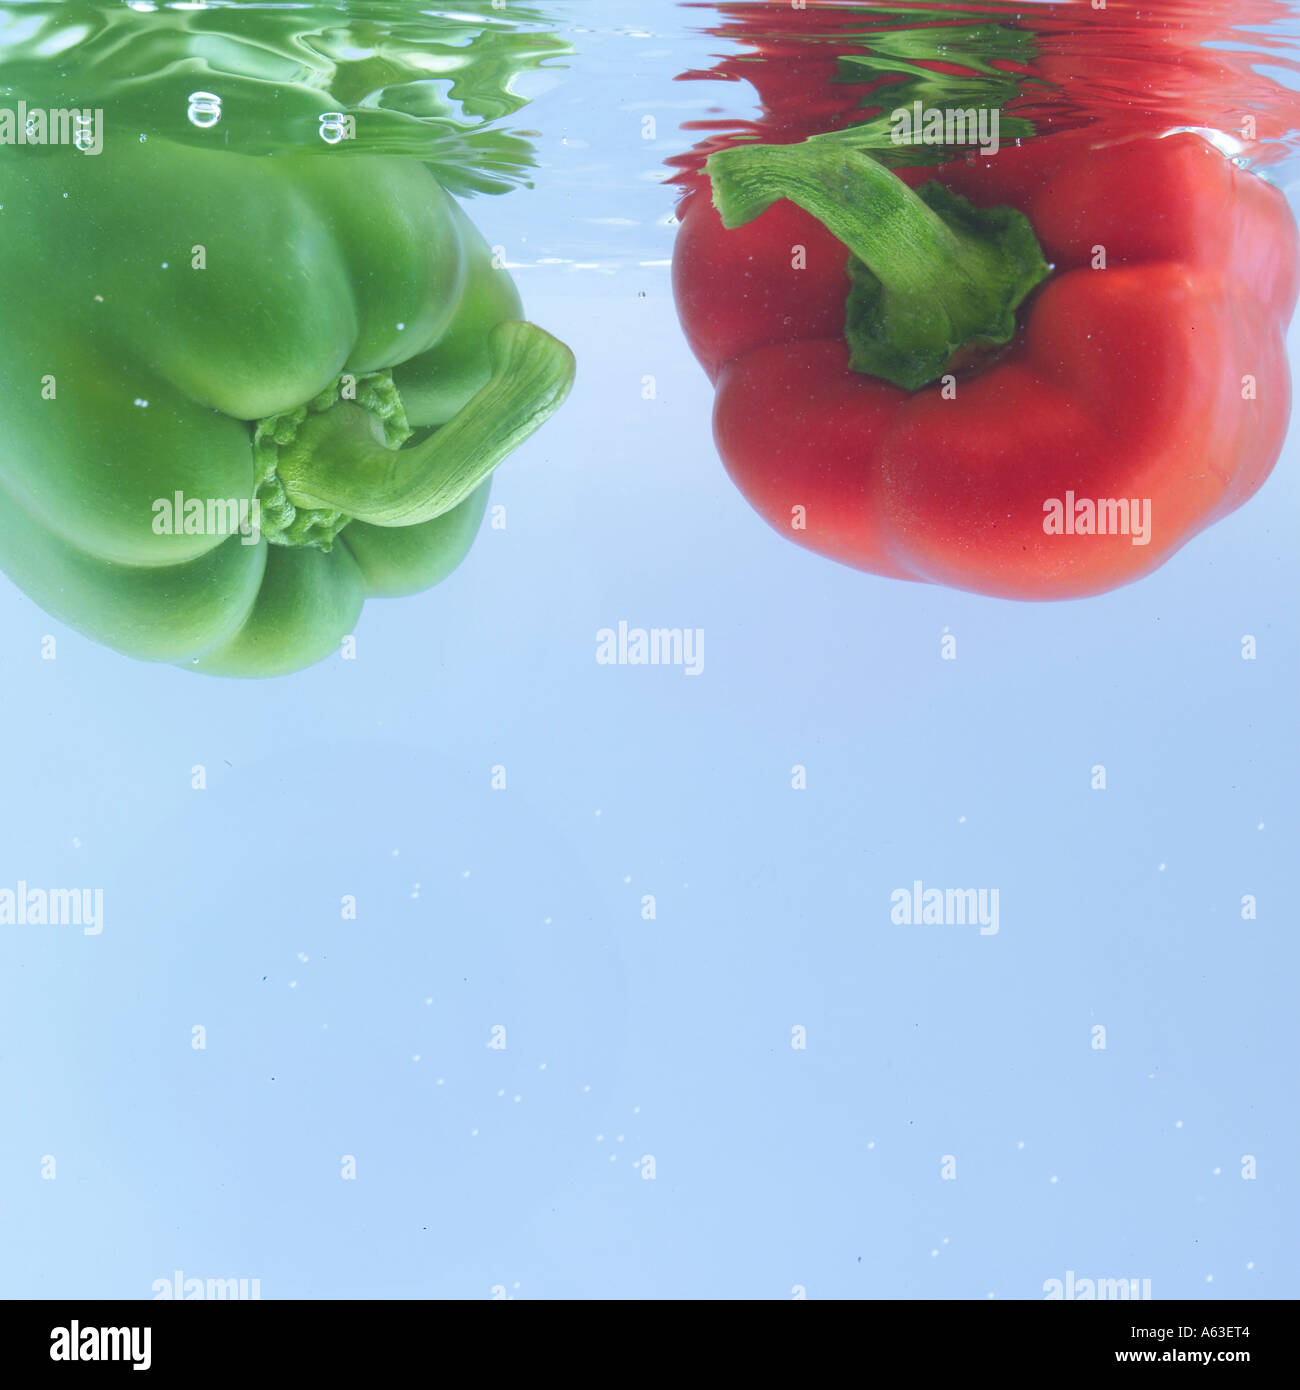 Close-up of red and green bell peppers in water Stock Photo